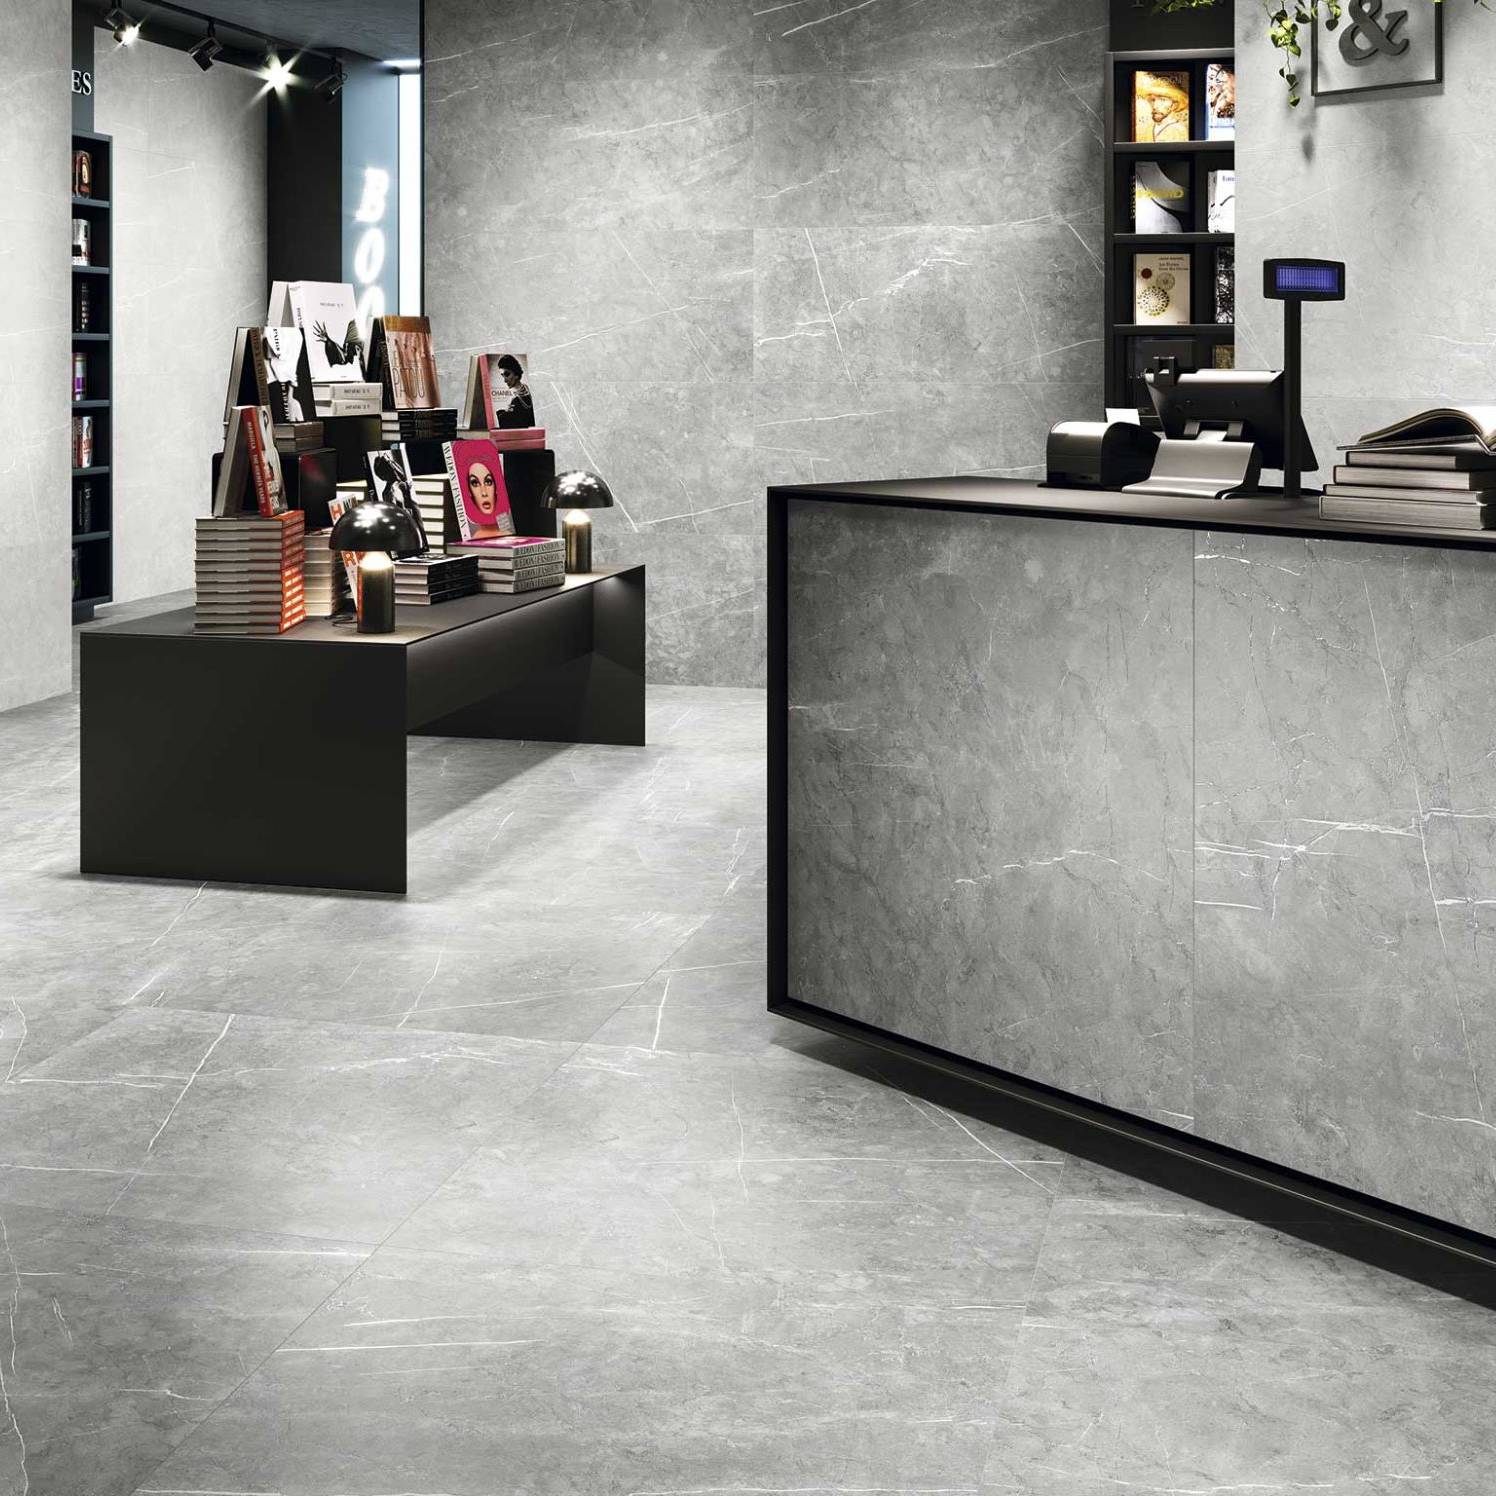 Lyon_2_G | Stones & More | Finest selection of Mosaics, Glass, Tile and Stone